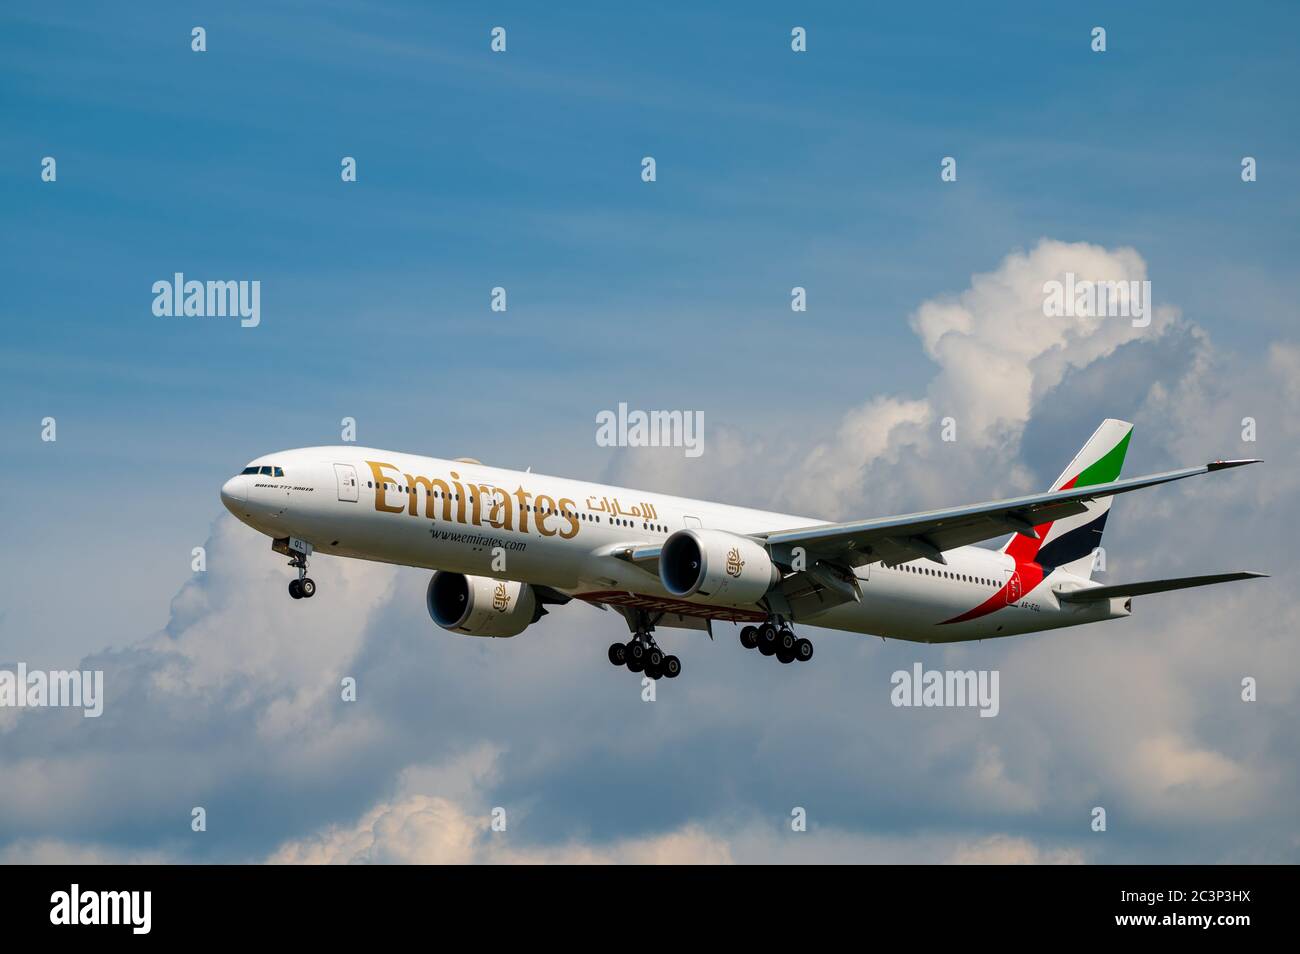 Emirates Airline Boeing 777-300ER wide body aircraft A6-EQL on approach to land at EDDF Frankfurt airport in Germany Stock Photo